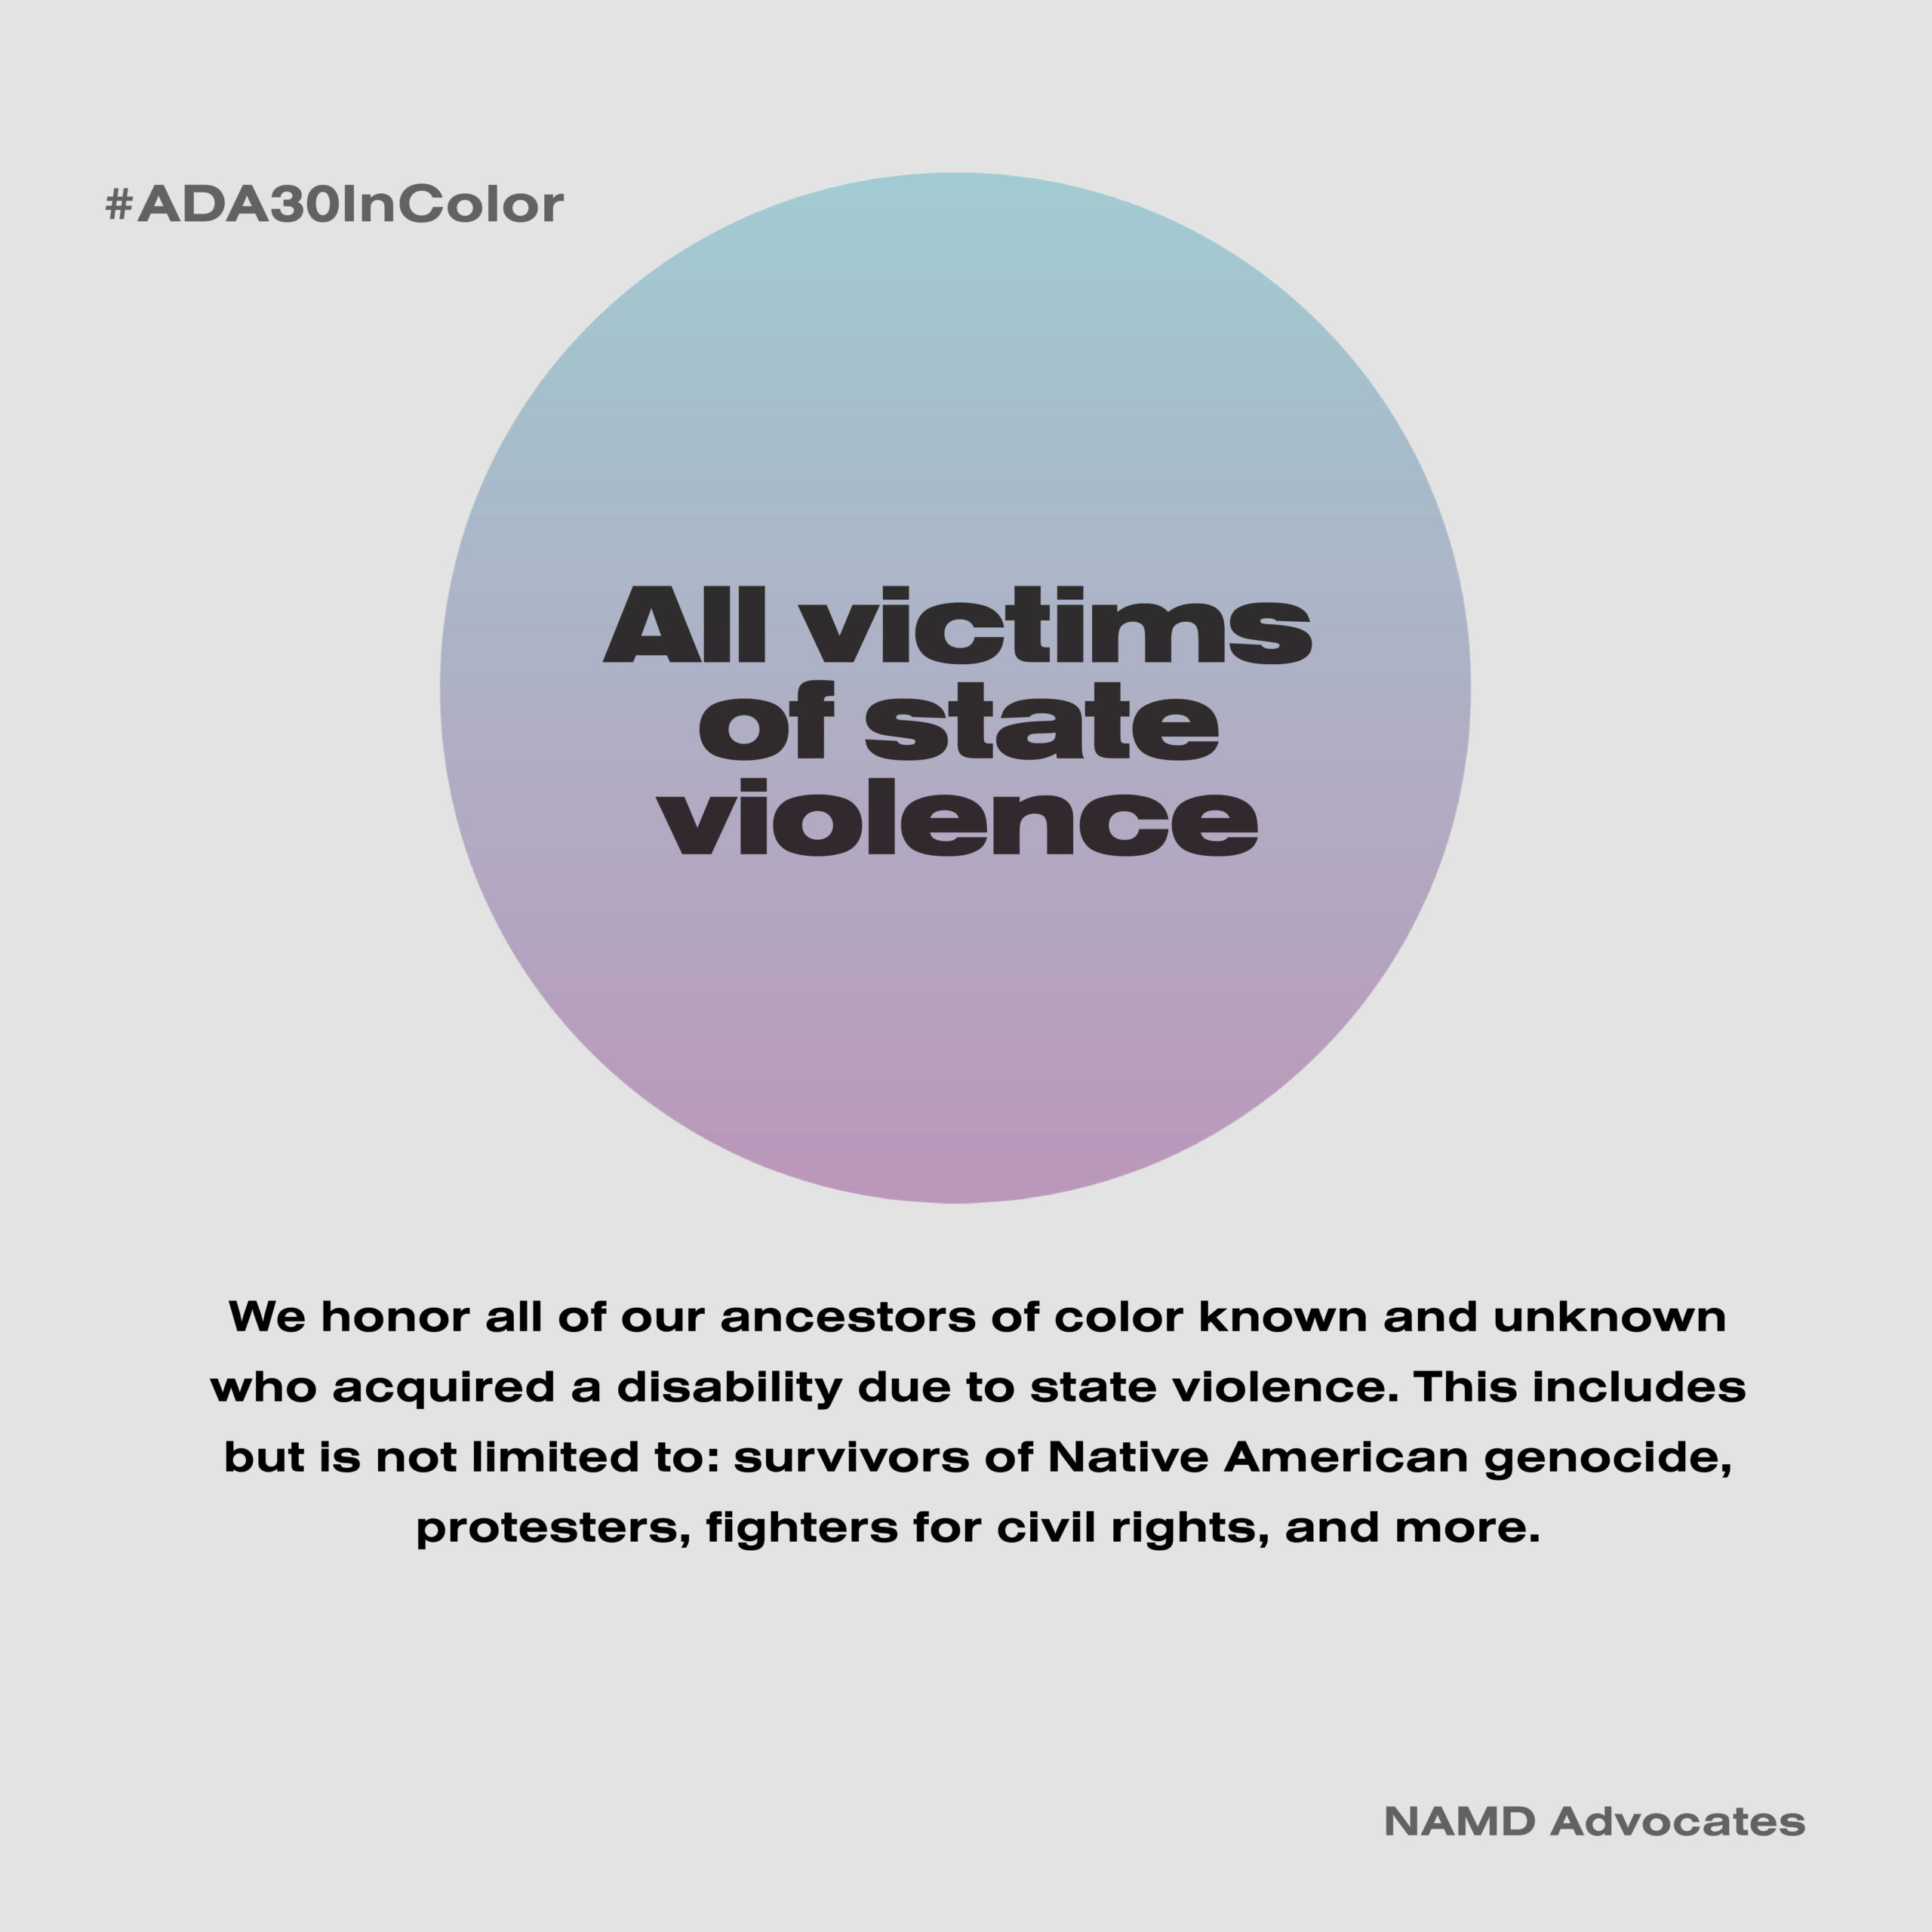 All Victims of State Violence. We honor all of our ancestors of color known and unknown who acquired a disability due to state violence. This includes but is not limited to: survivors of Native American genocide, protesters, fighters for civil rights, and more.